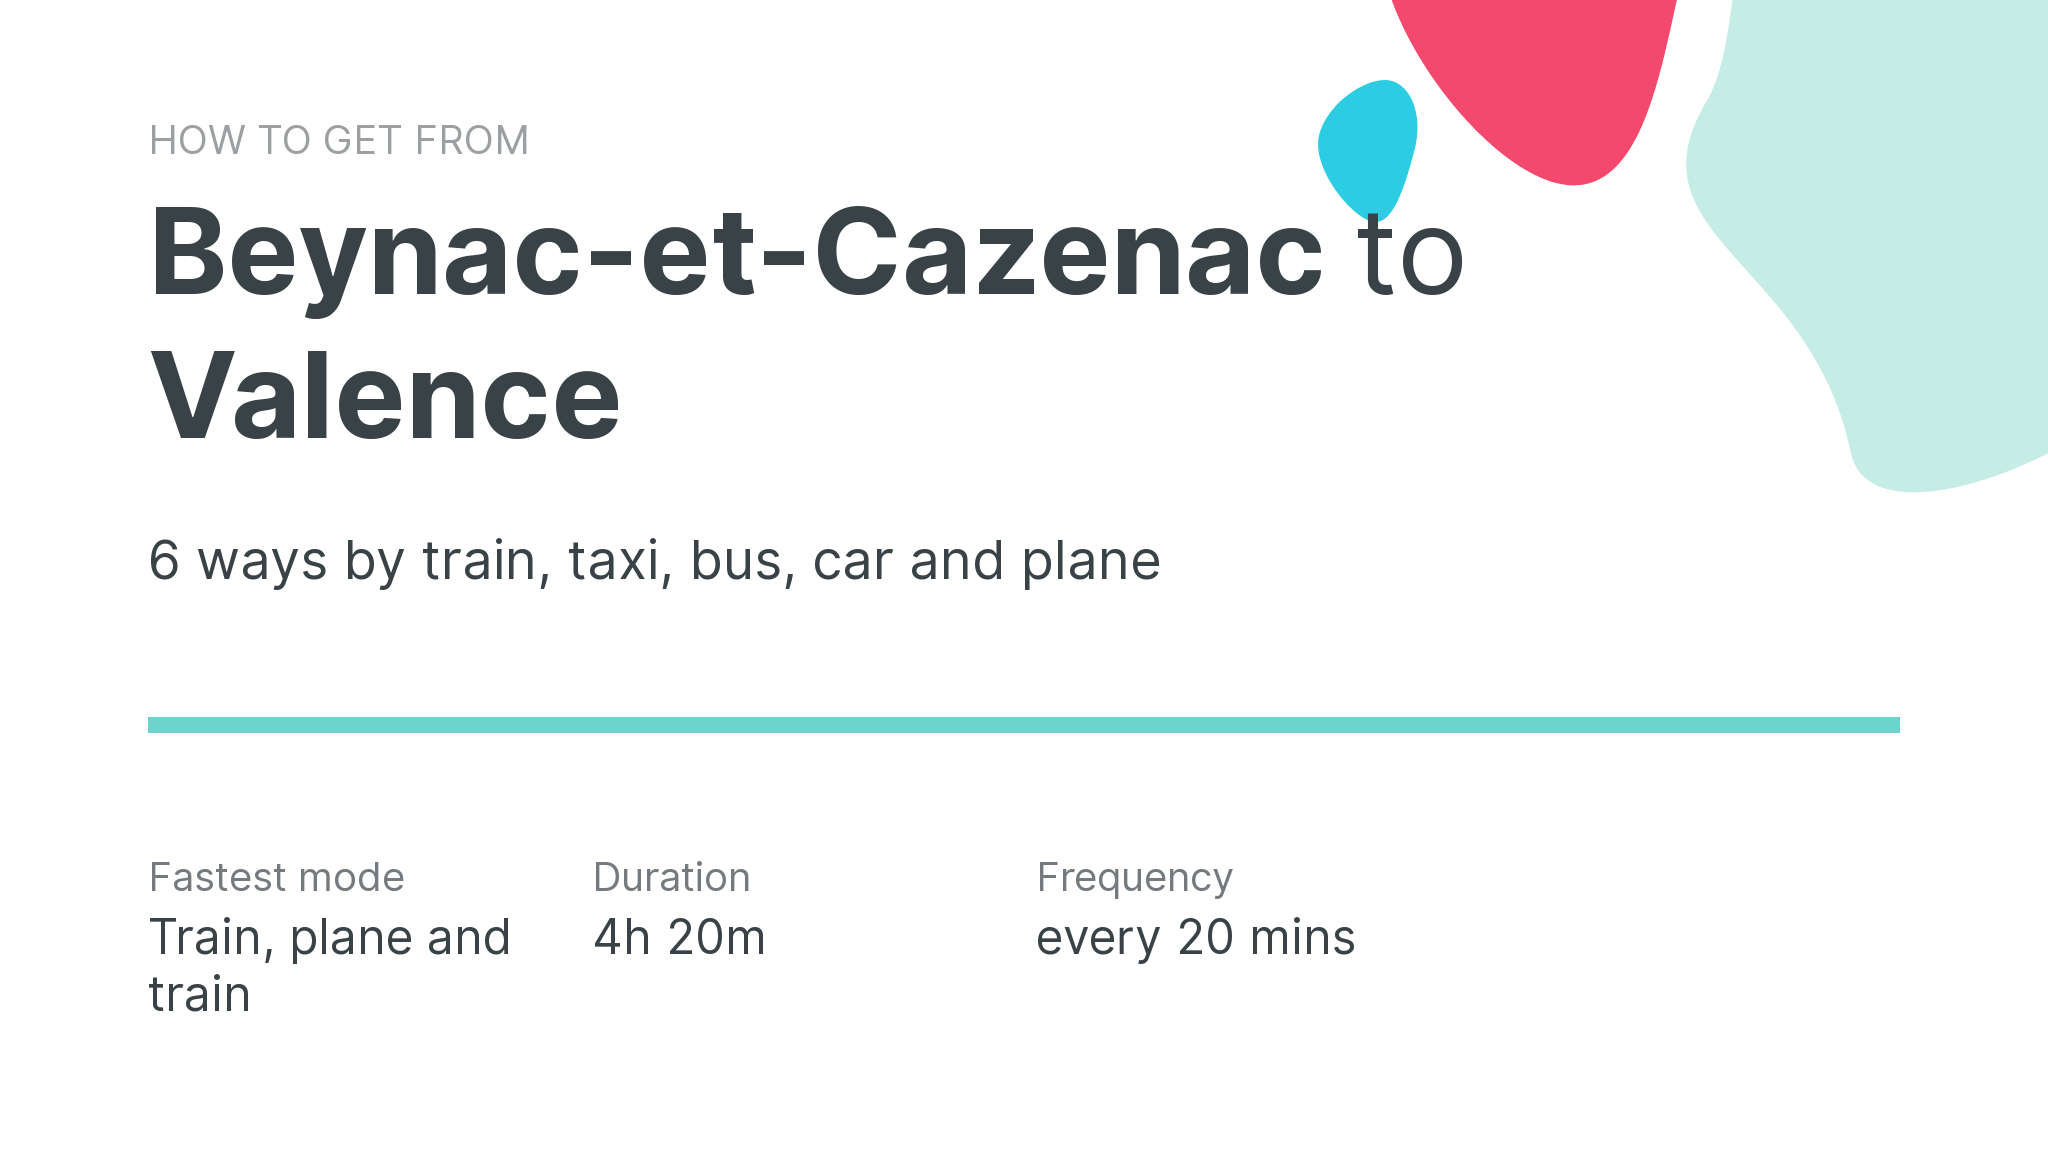 How do I get from Beynac-et-Cazenac to Valence